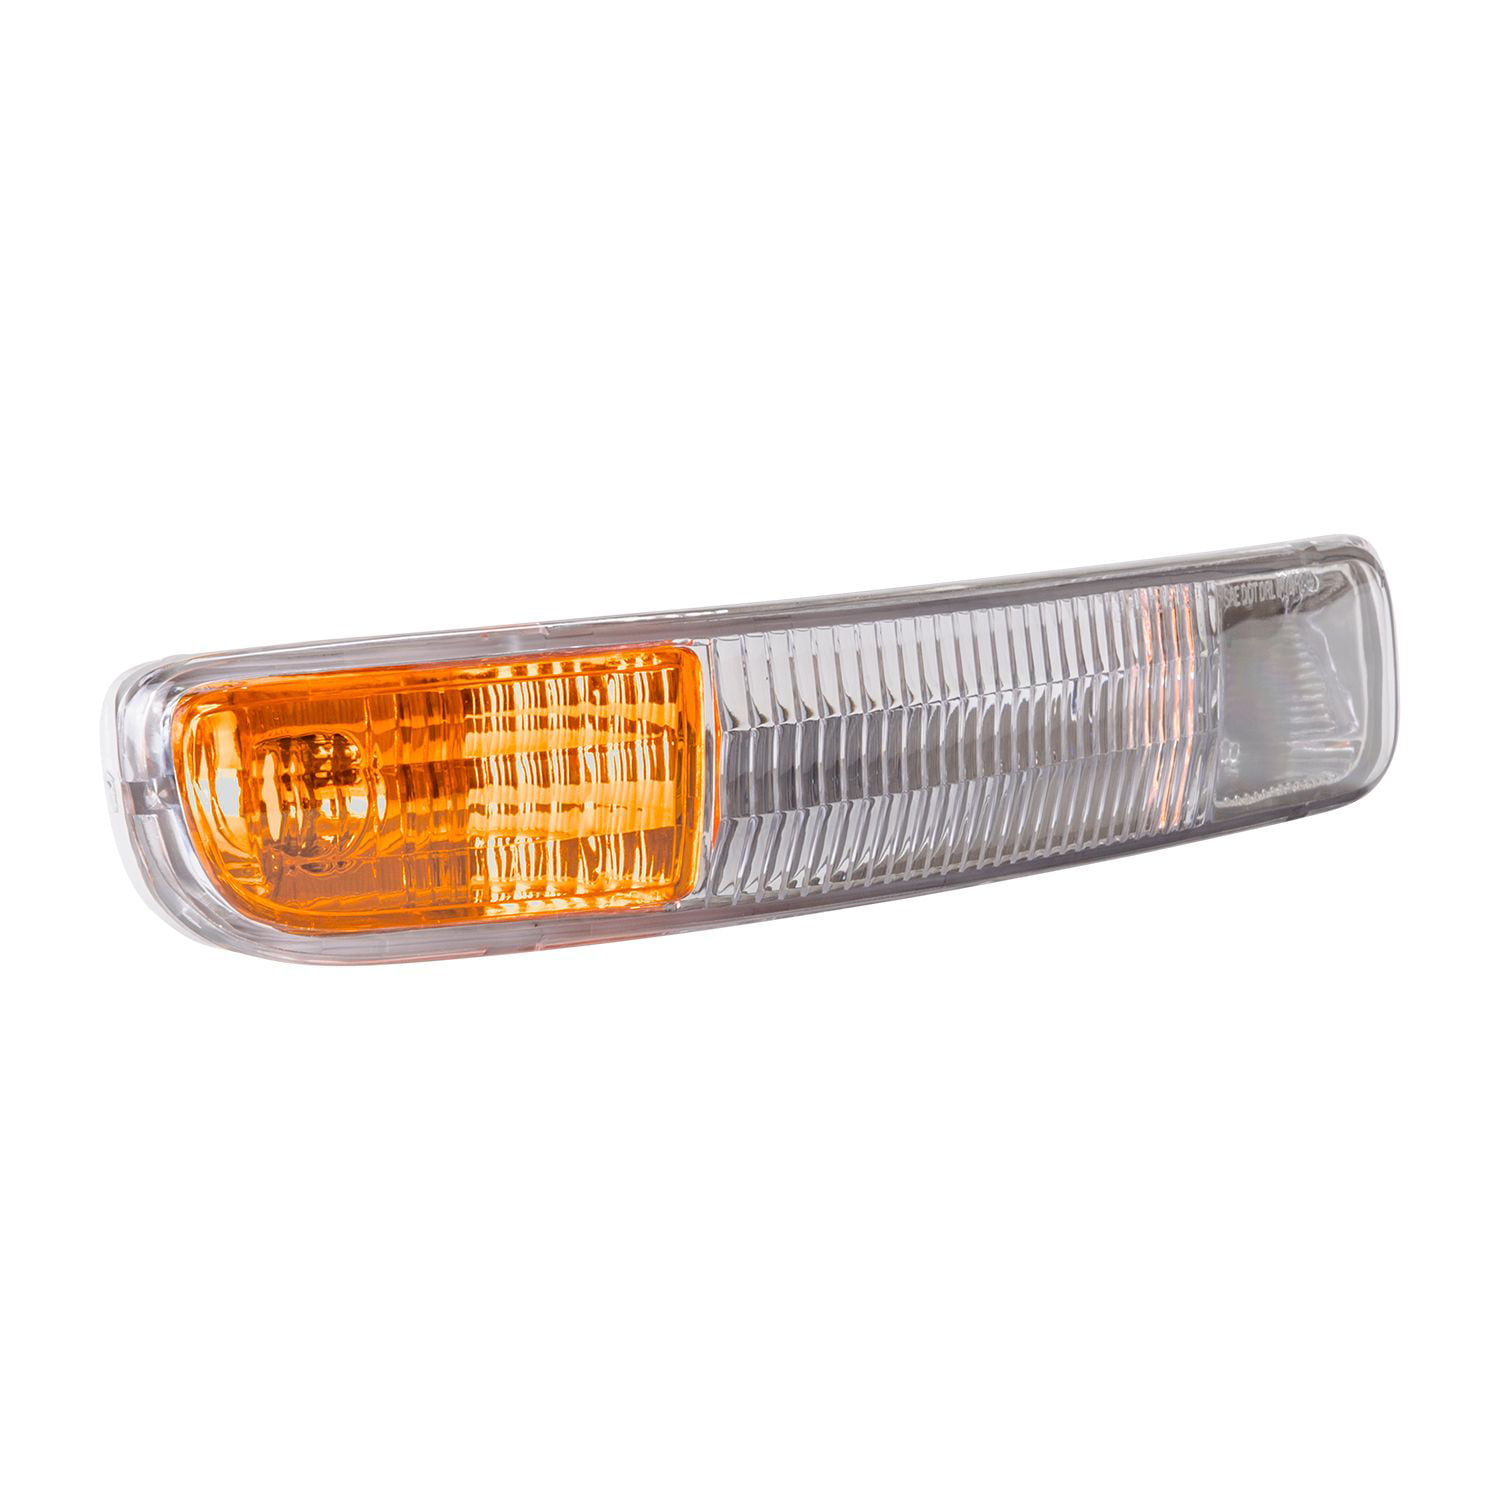 TYC 12-5103-01 GMC Passenger Side Replacement Parking/Signal/Side Marker Lamp Assembly 